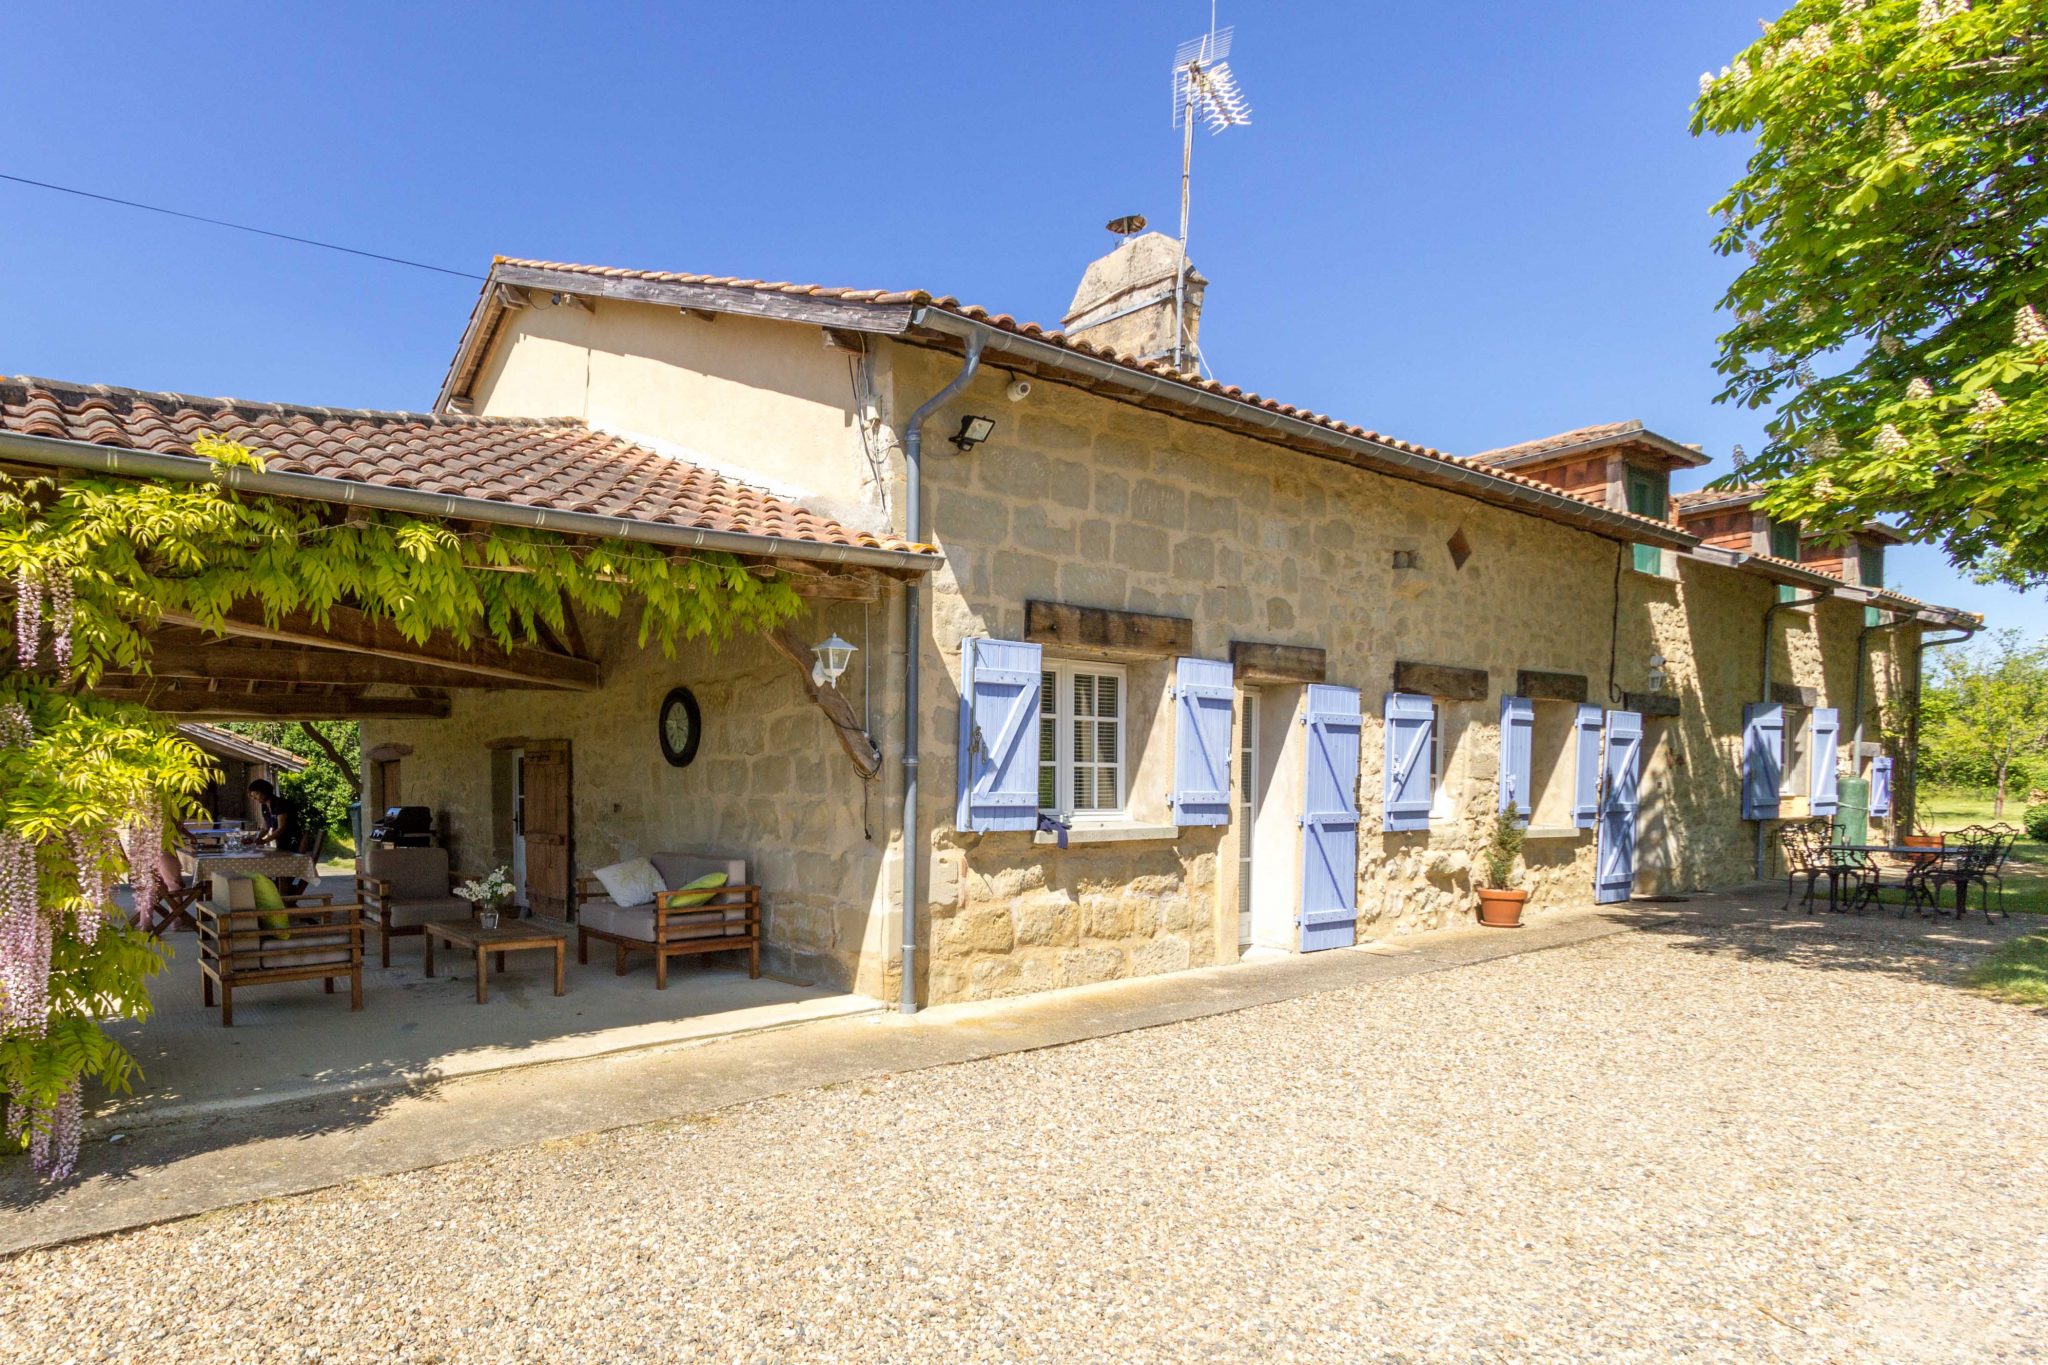 Holiday villa in France with a pool, near Bordeaux, Bergerac and the Dordogne south west France